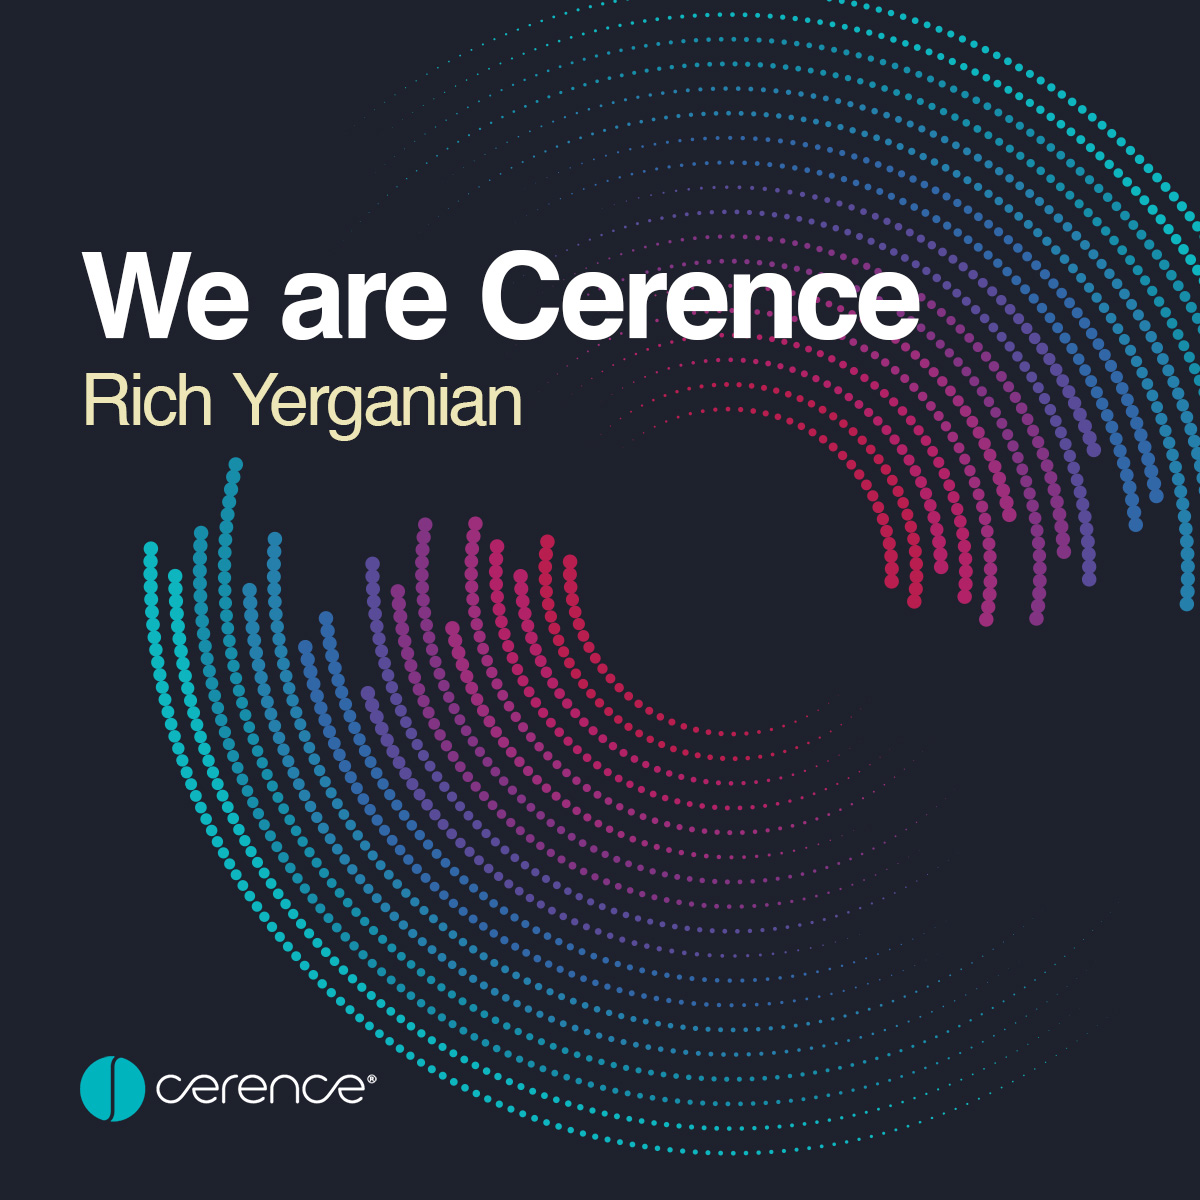 We Are Cerence Employee Spotlight: Rich Yerganian